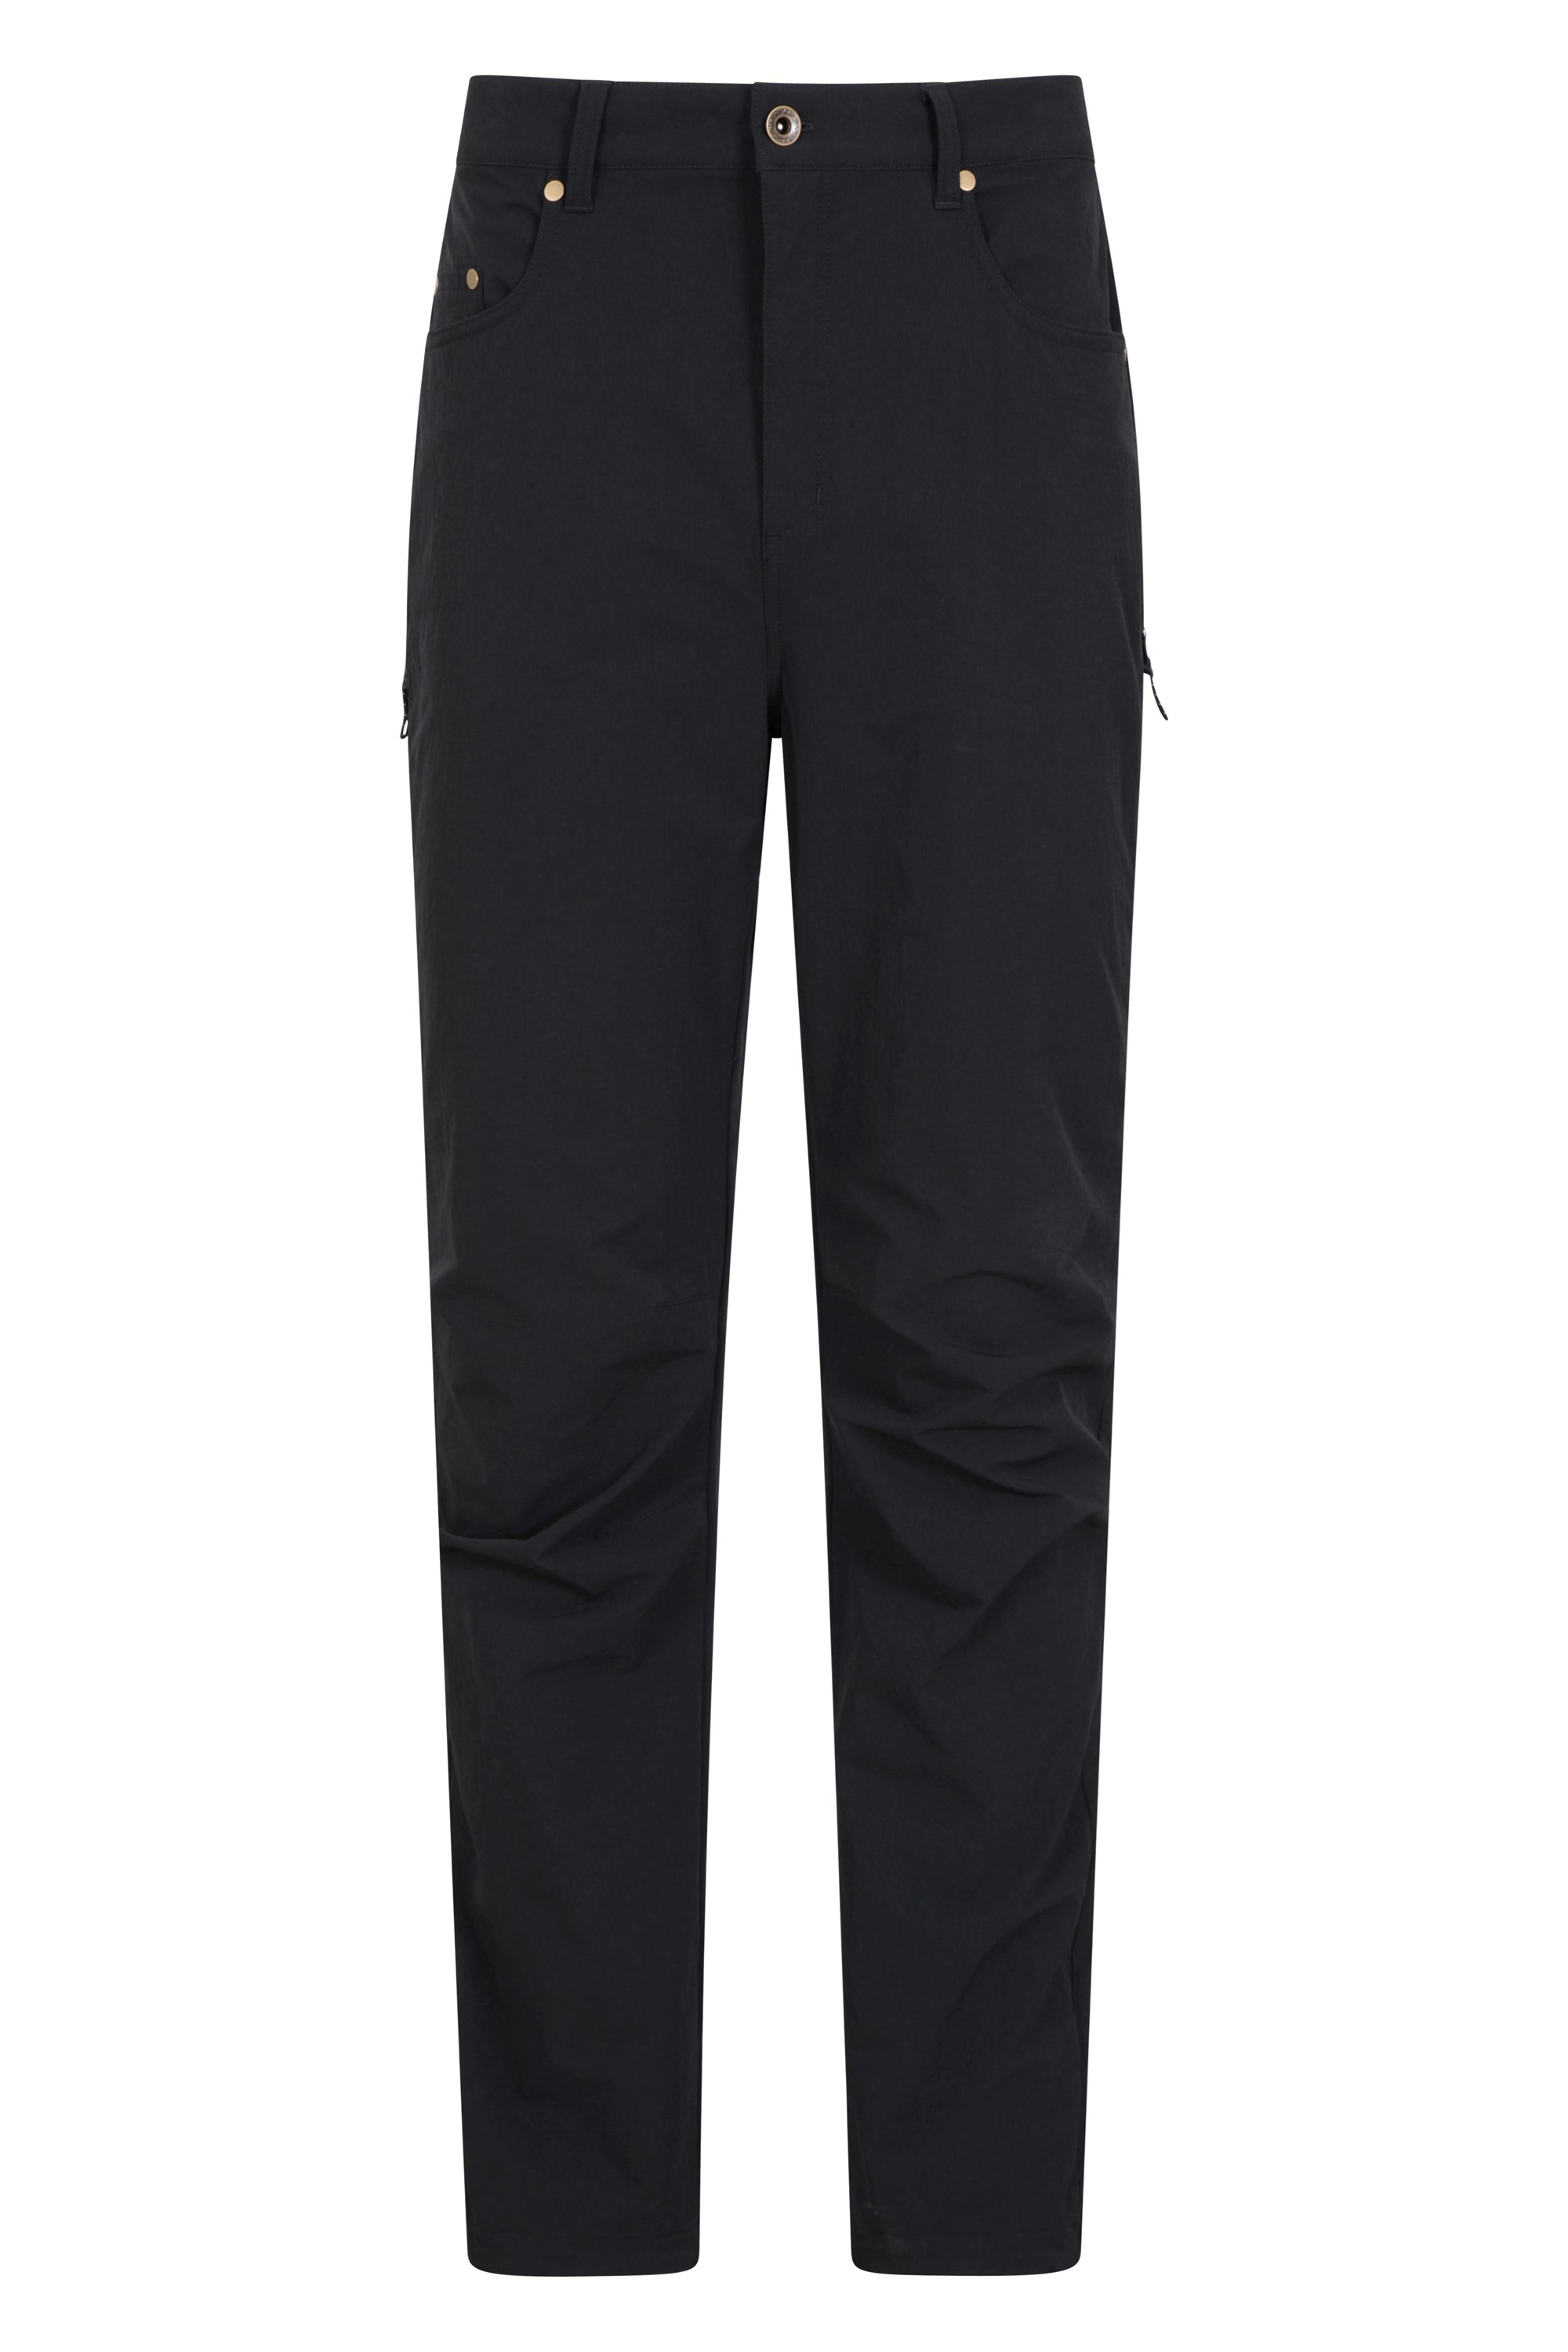 Anthracite Mens Outdoor Pants - Short Length